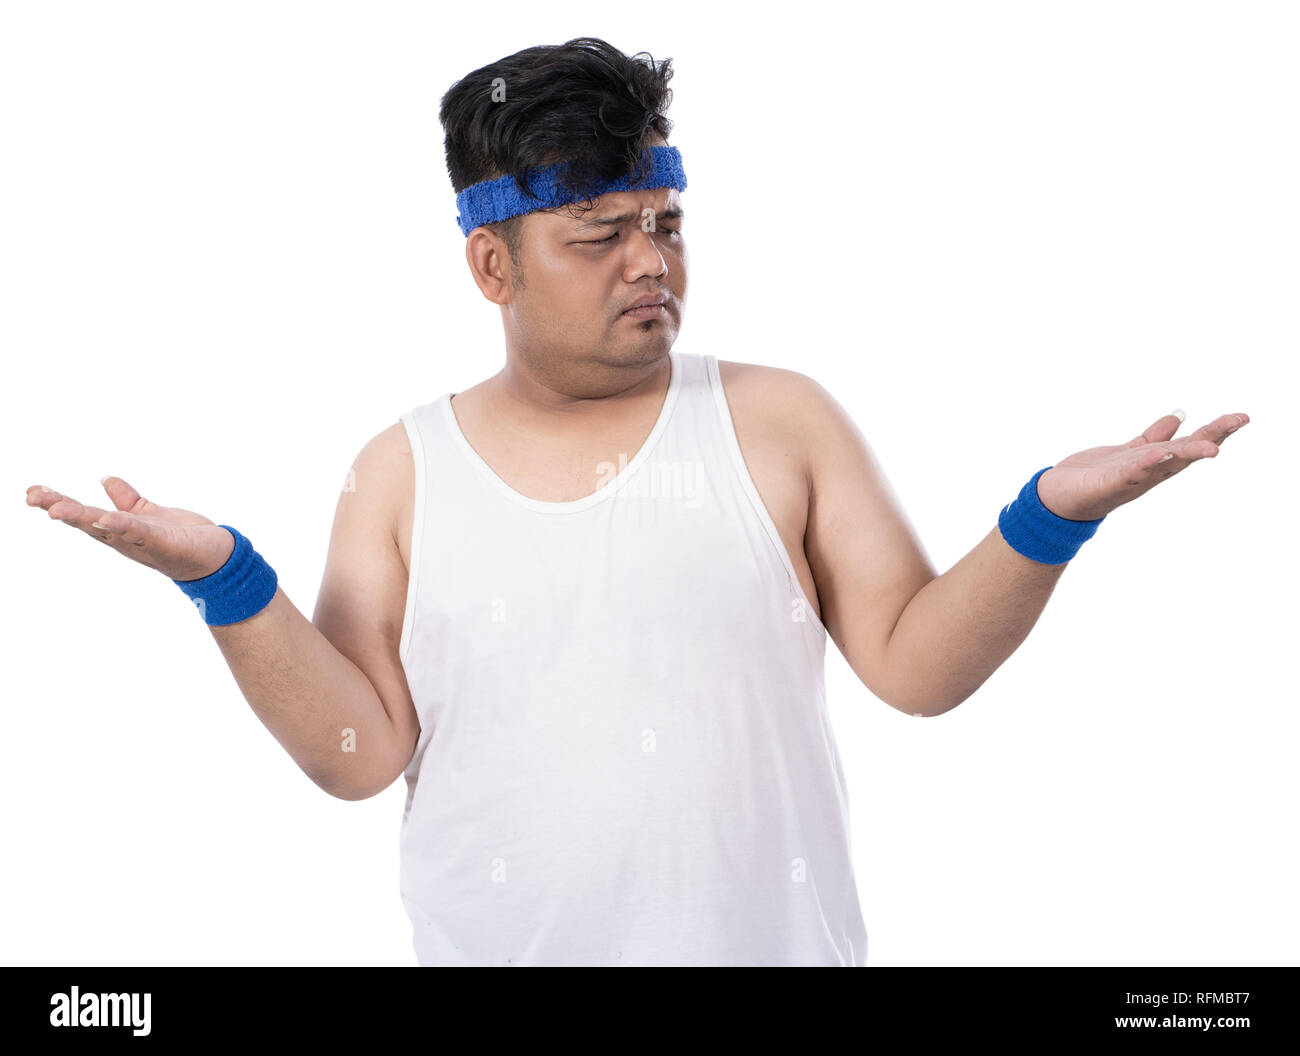 portrait of sporty fat young man raised his hand disappointed Stock Photo